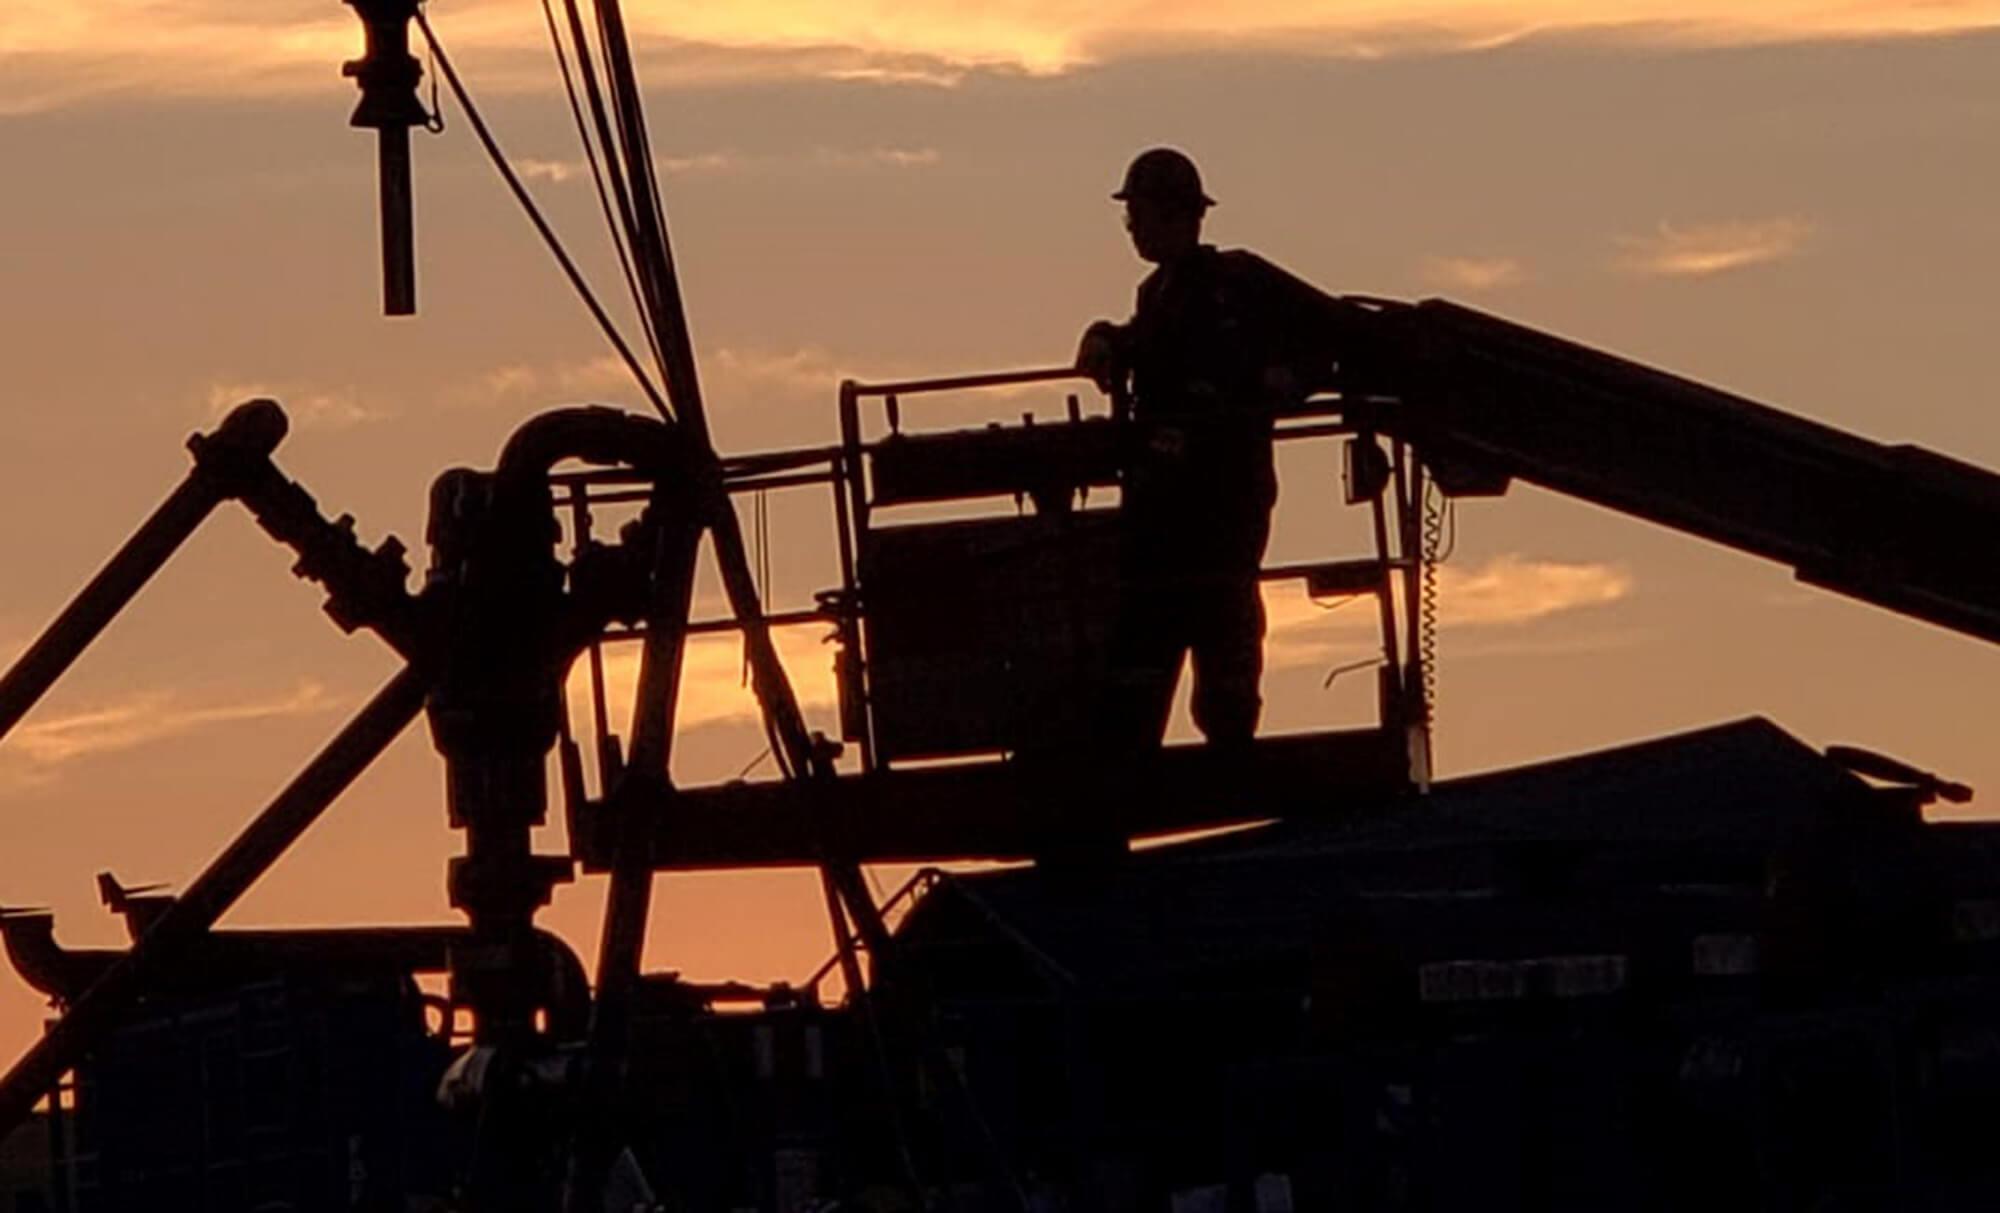 Man on Heavy Equipment Silhouetted against Sunset